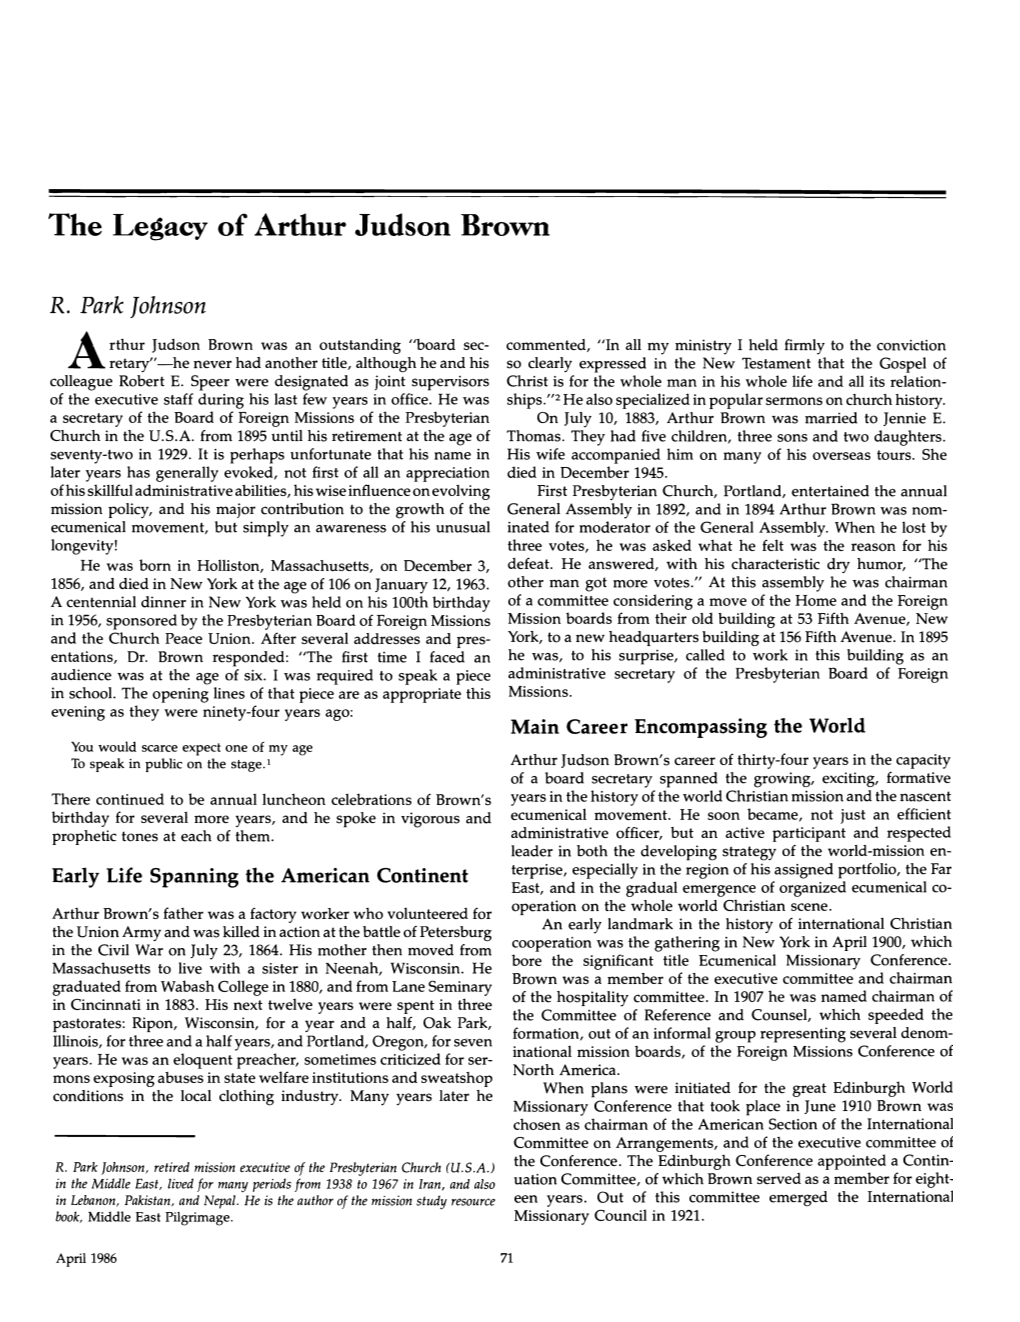 The Legacy of Arthur Judson Brown